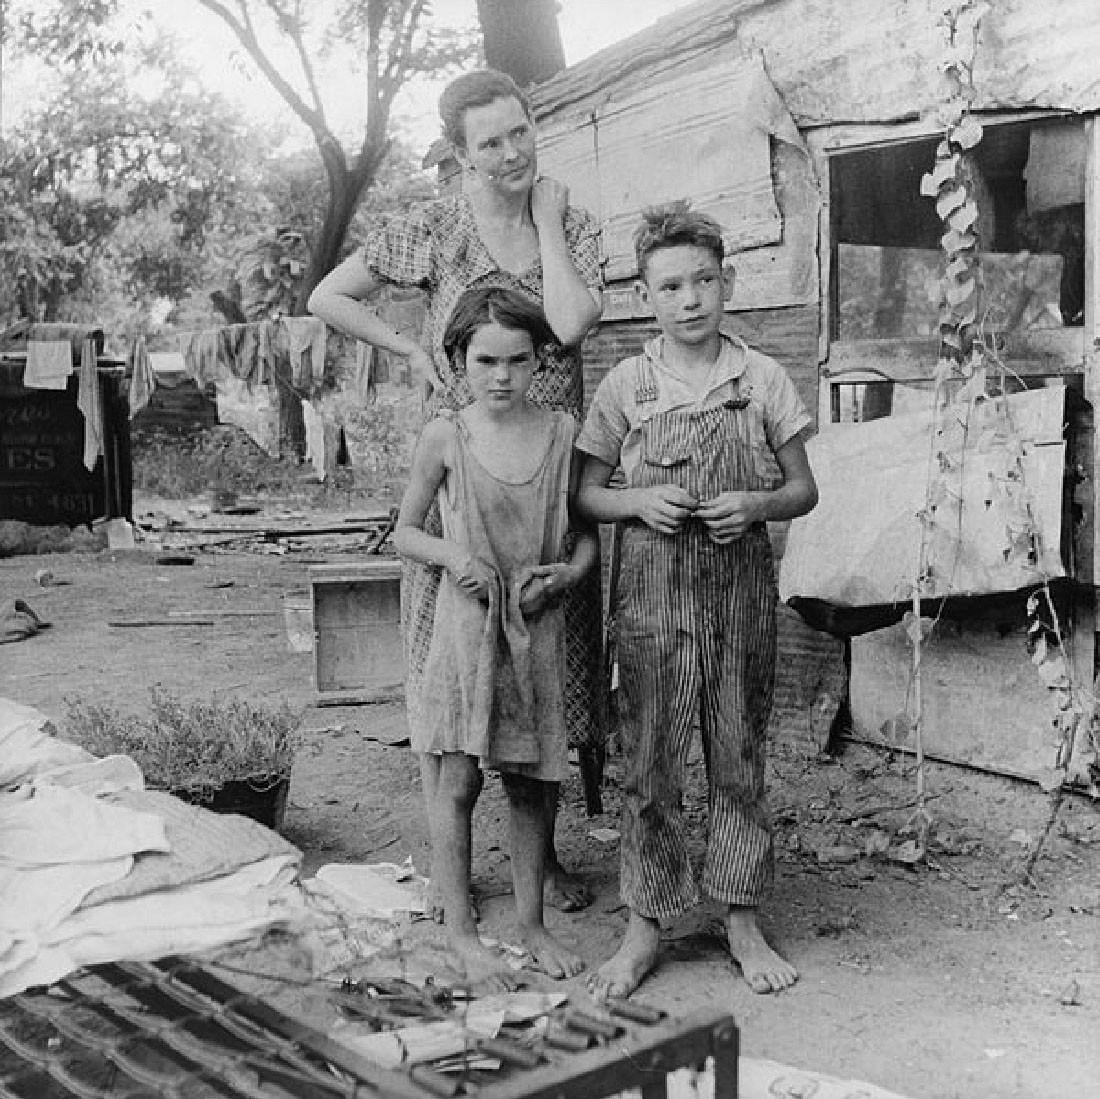 The photograph captures a woman and two children. They are barefoot and their clothes look dirty. Trash is visible nearby..